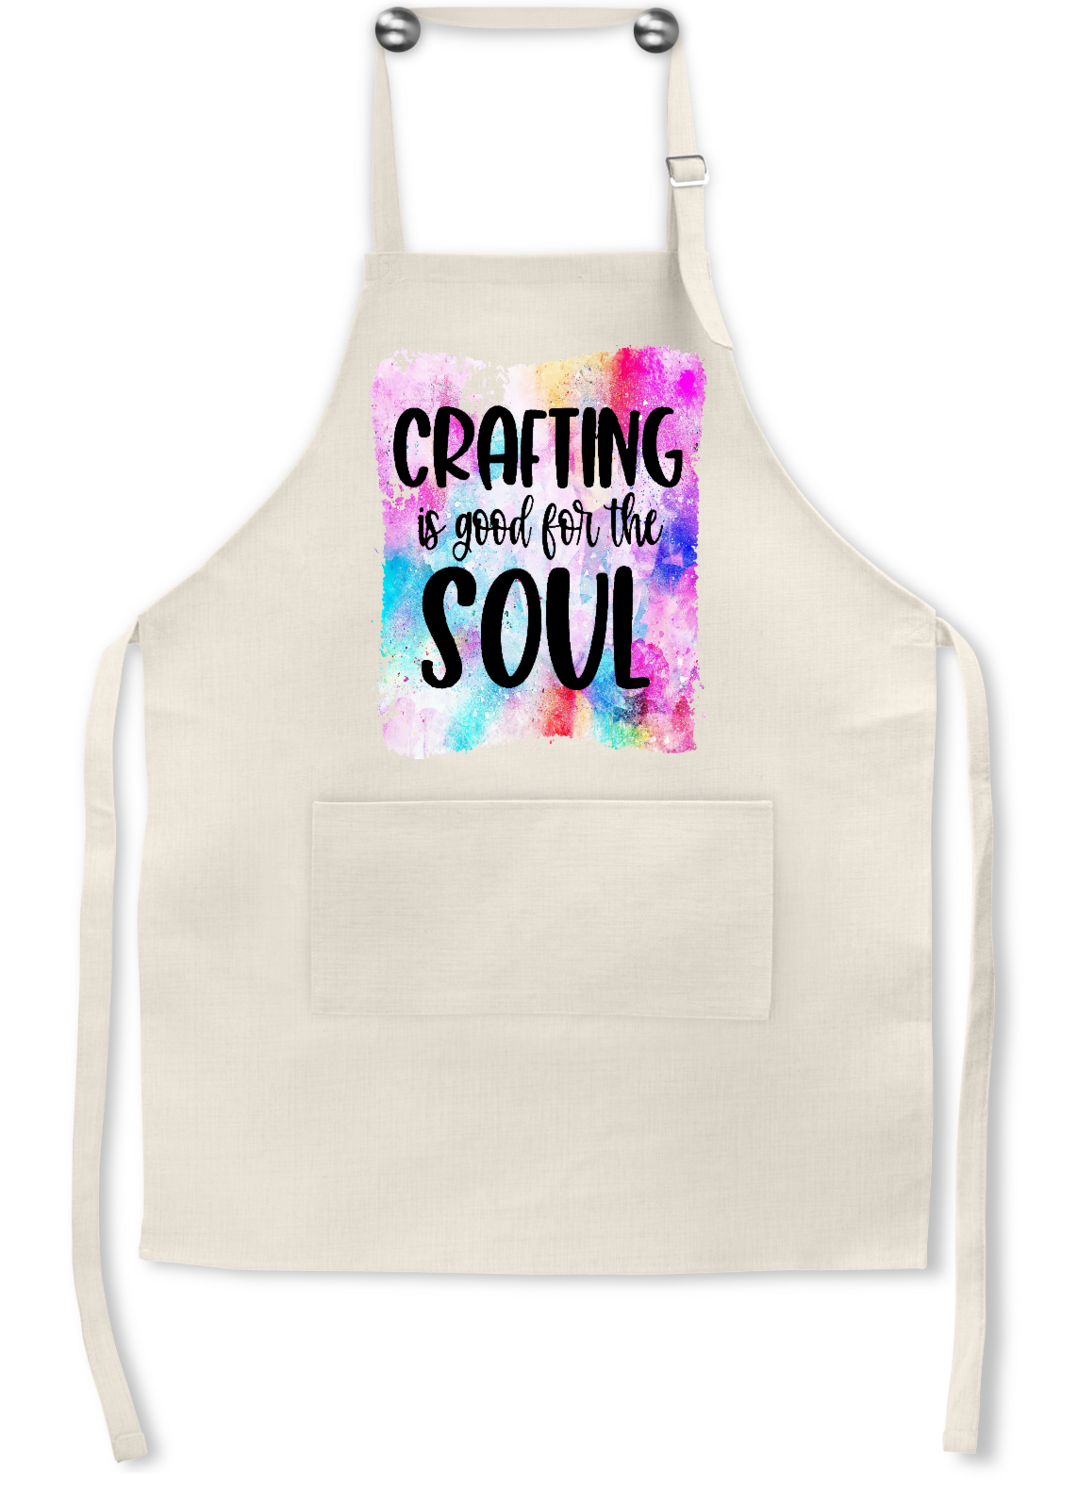 Crafting Apron: CRAFTING IS GOOD FOR THE SOUL